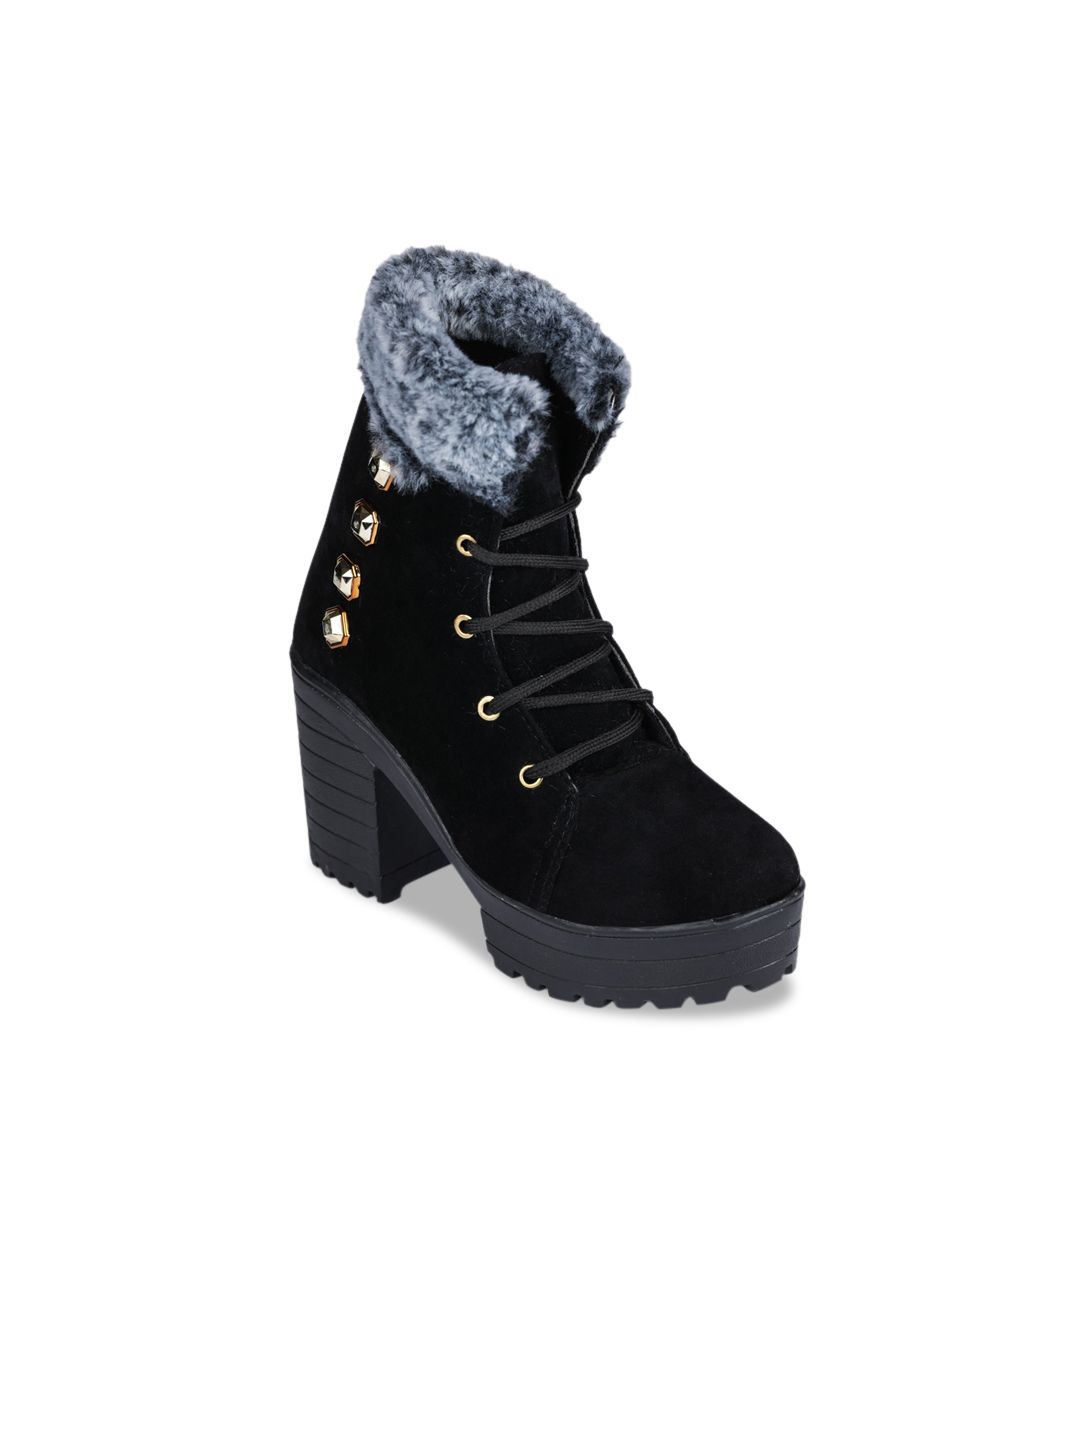 Funku Fashion Women Black Colourblocked Suede High-Top Heeled Boots Price in India